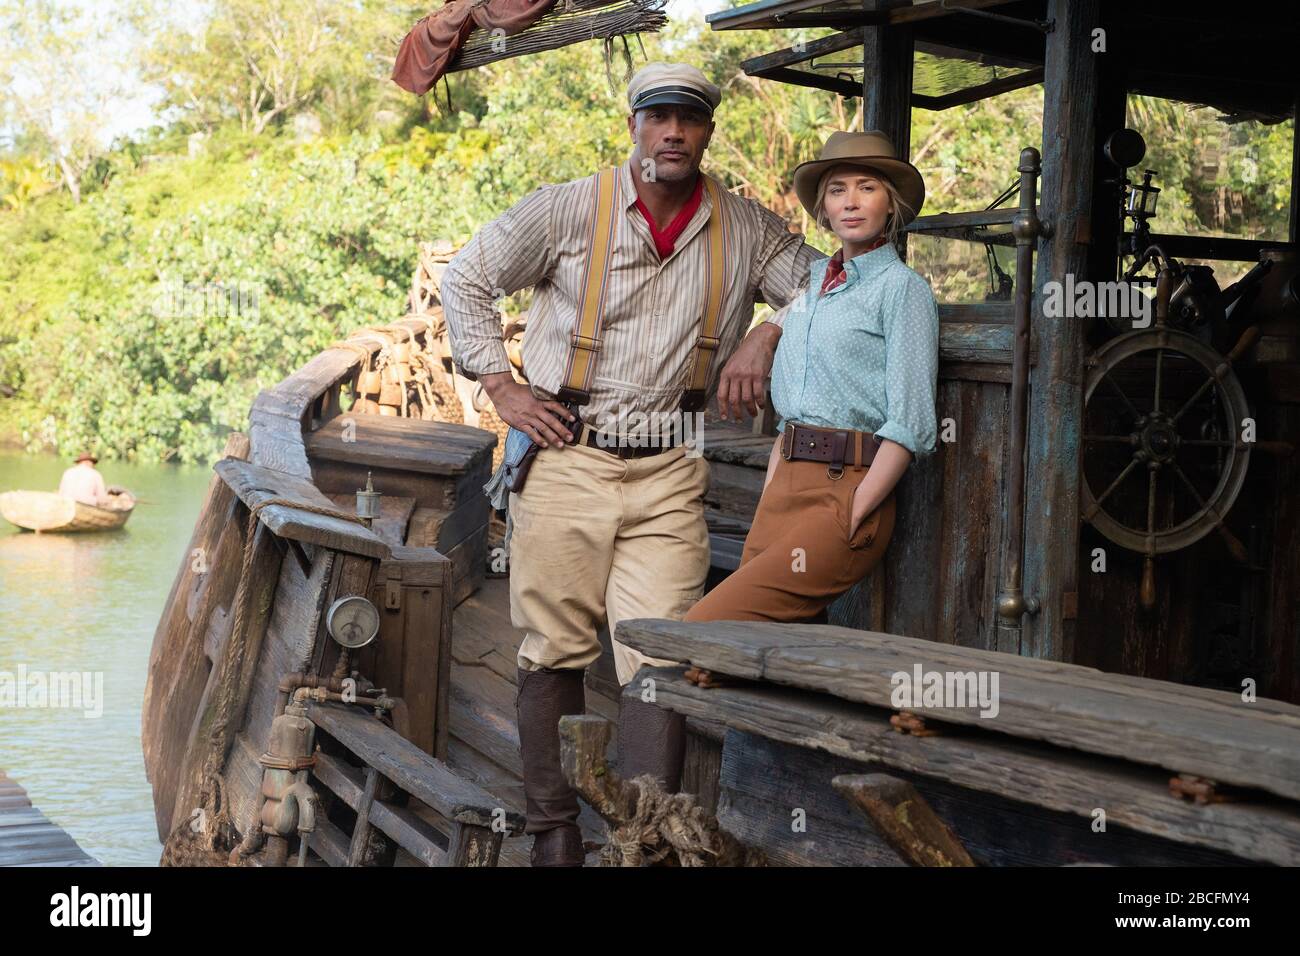 DWAYNE JOHNSON and EMILY BLUNT in JUNGLE CRUISE (2020), directed by JAUME COLLET-SERRA. Credit: Walt Disney Pictures / Zaftig Films / TSG Entertainment / Se / Album Stock Photo